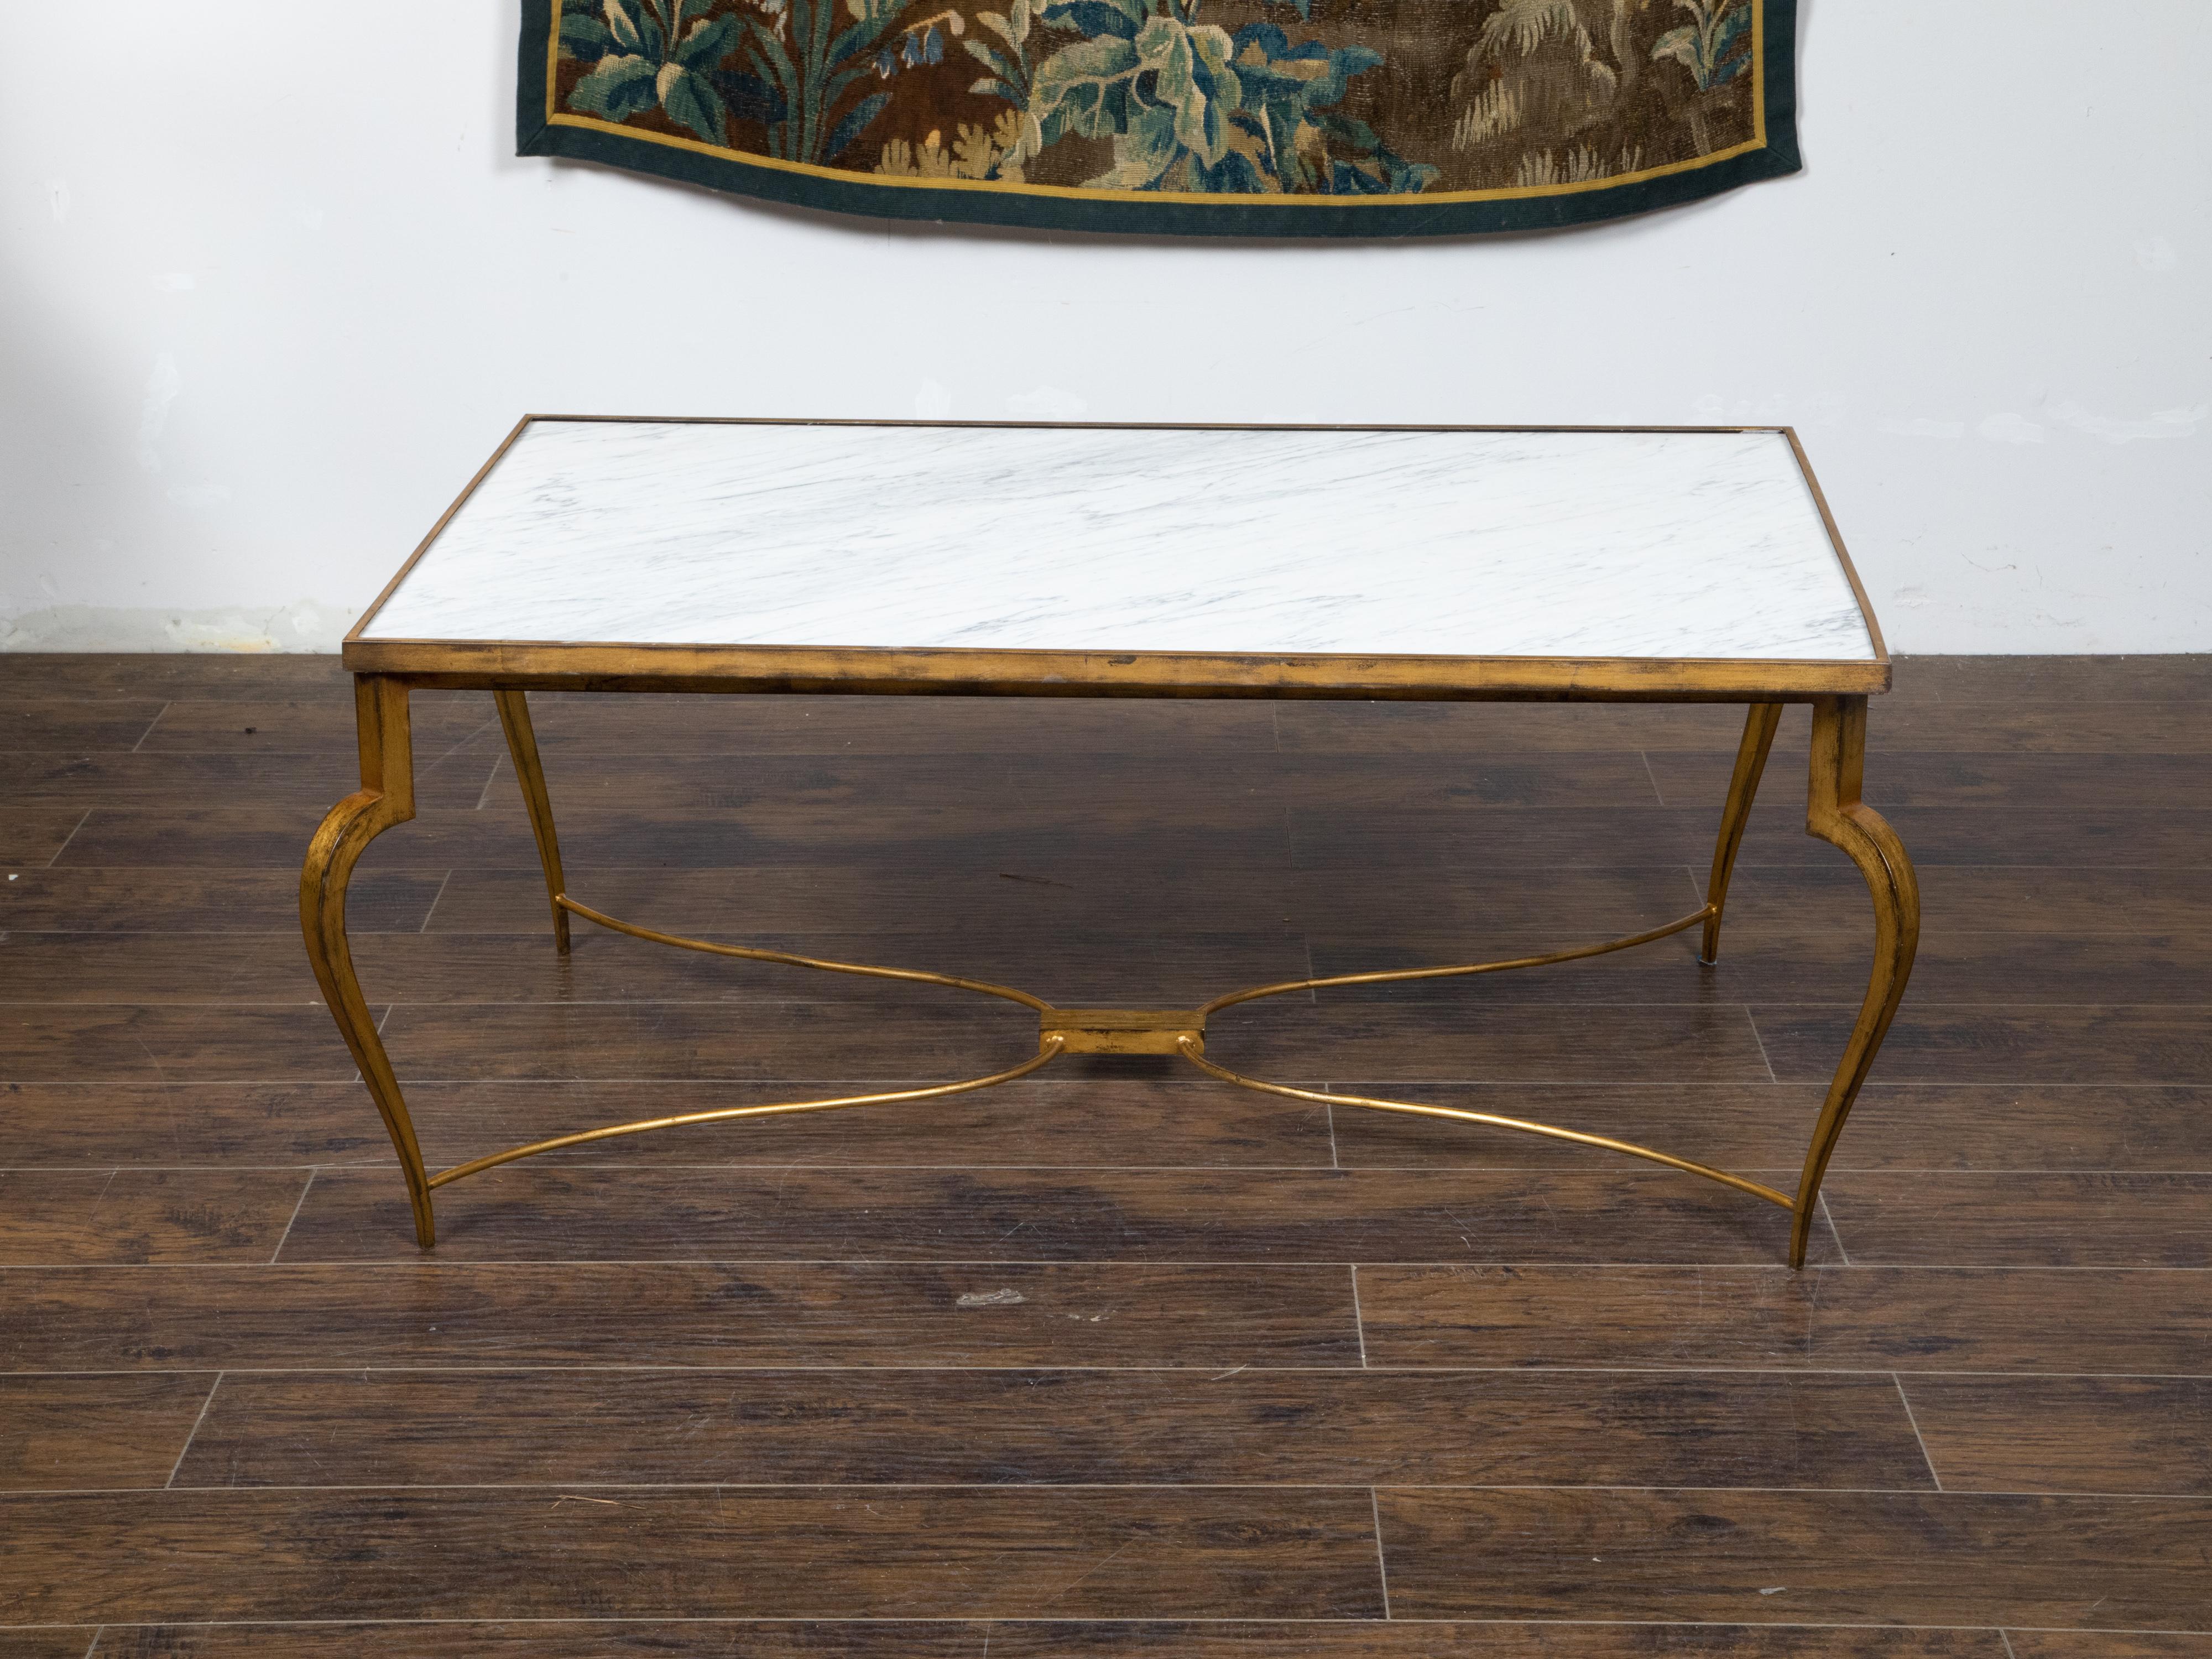 20th Century French Midcentury Gilt Iron Coffee Table with White Marble Top and Cabriole Legs For Sale